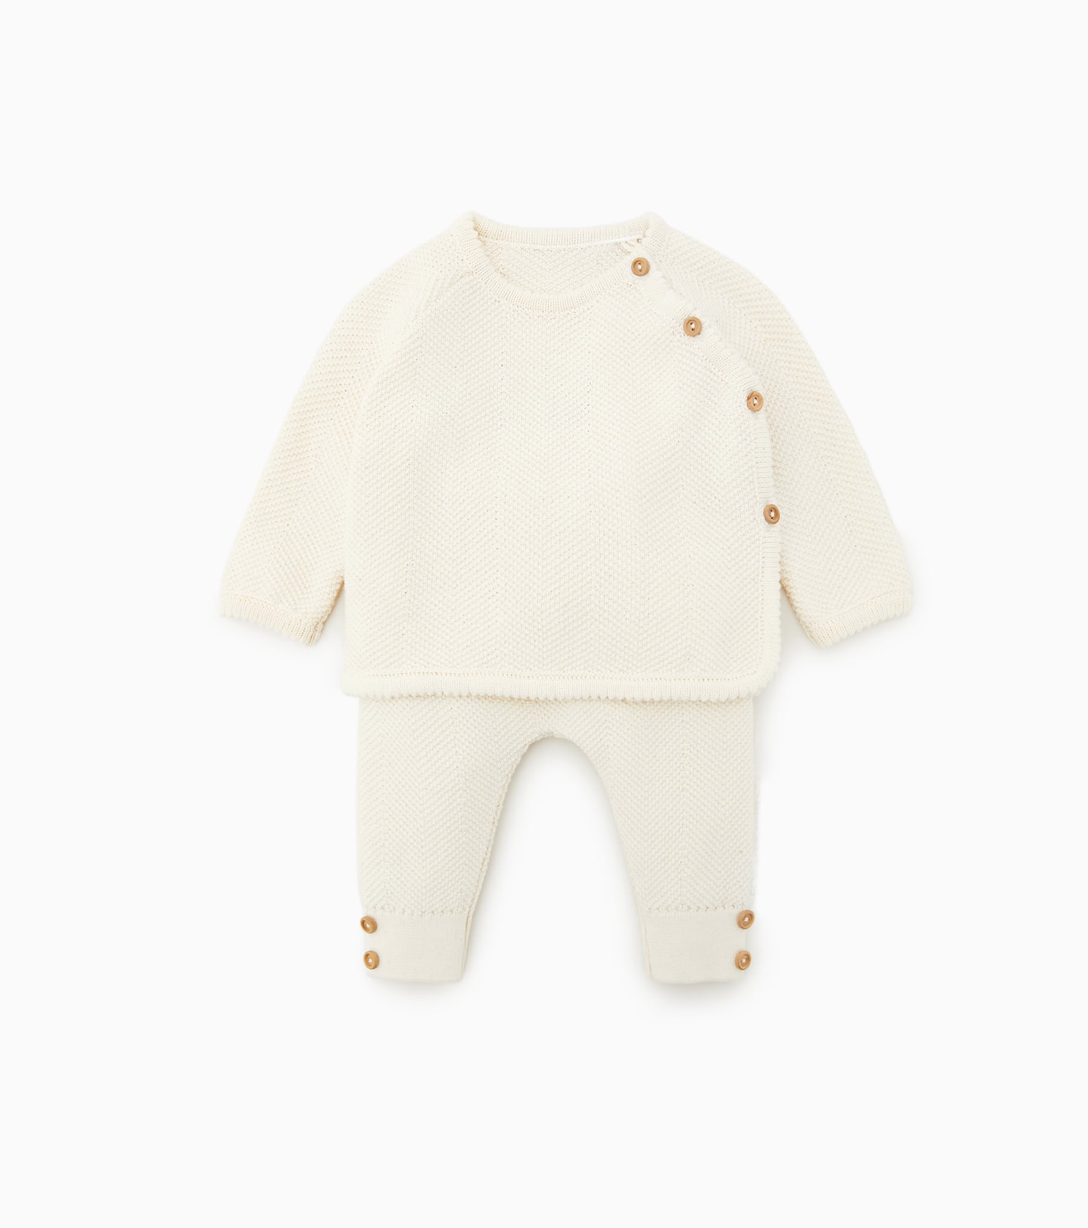 photo of a newborn outfit that would be perfect for family photos